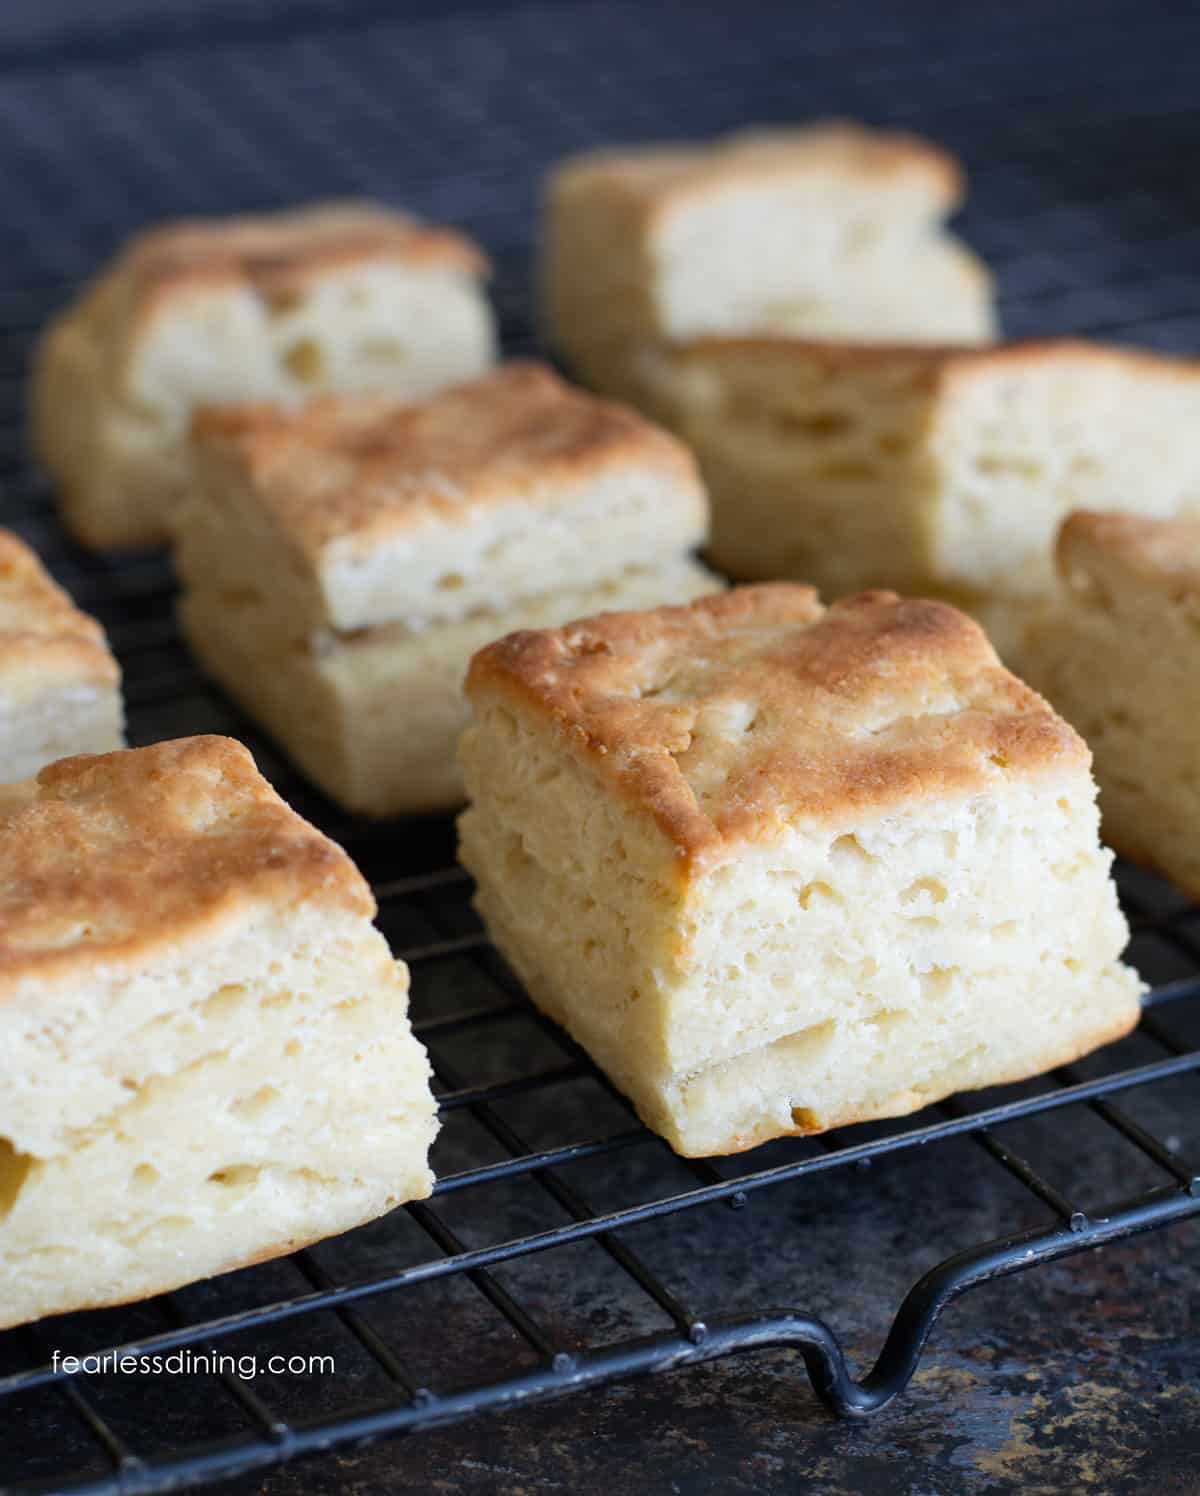 Biscuits fresh out of the oven and cooling on a wire rack.